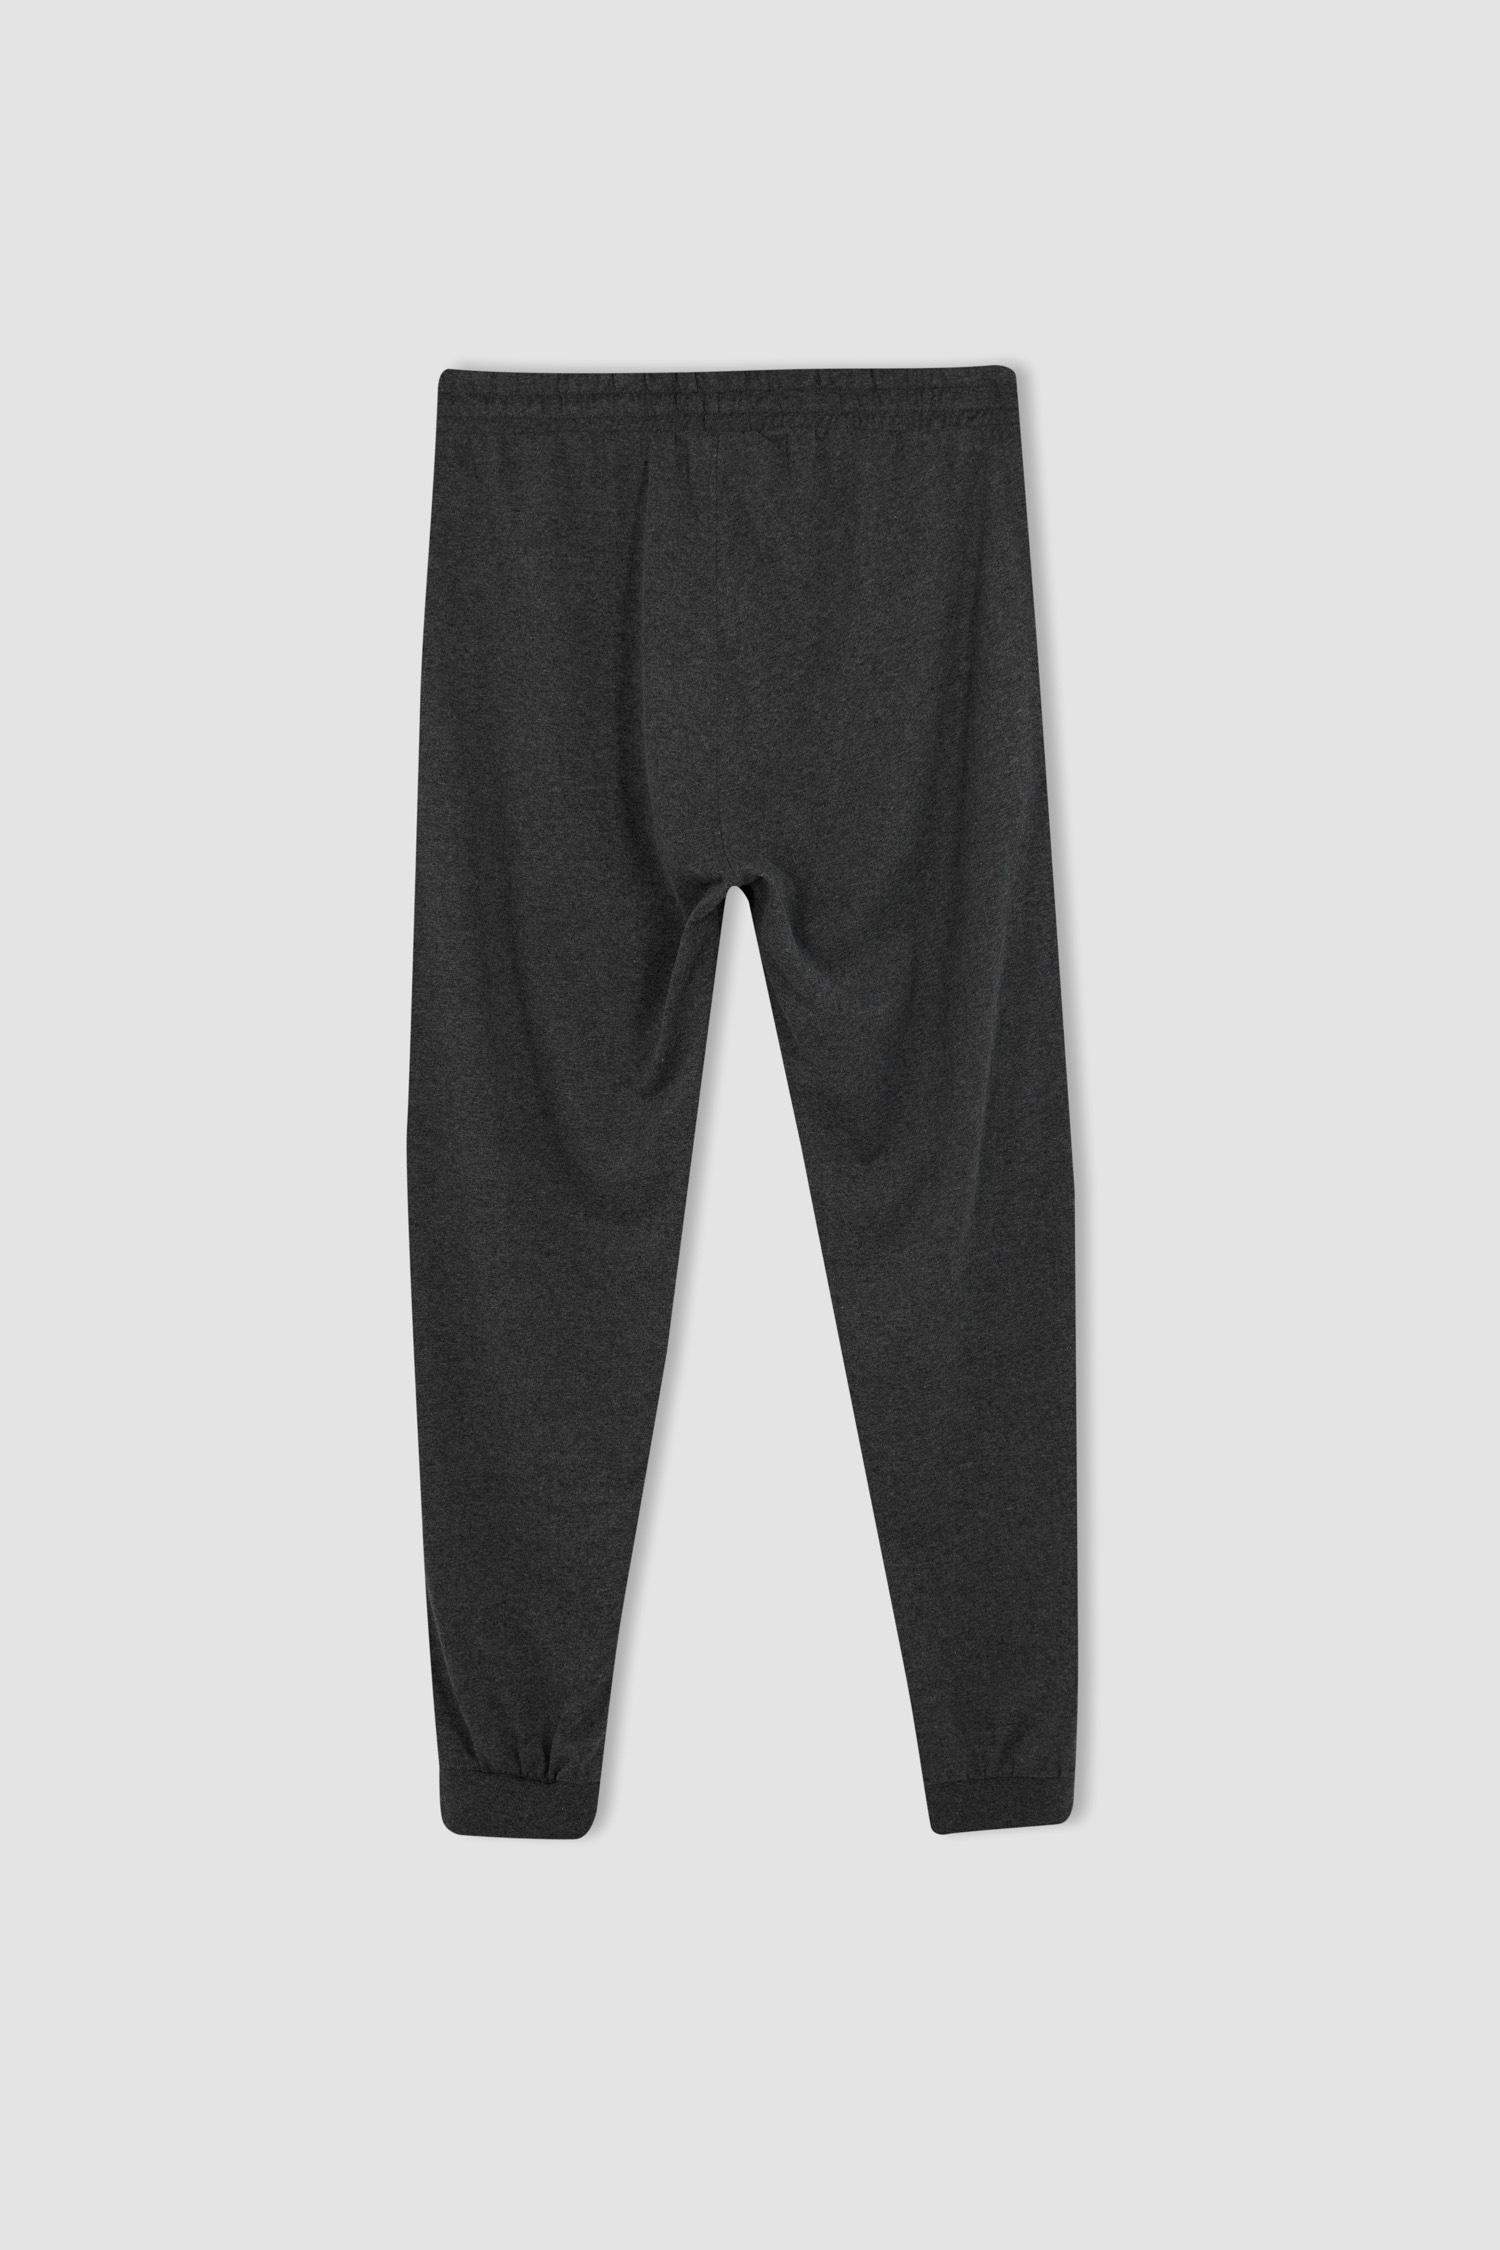 Anthracite Man Regular Fit Knitted Bottoms 2649717 | DeFacto